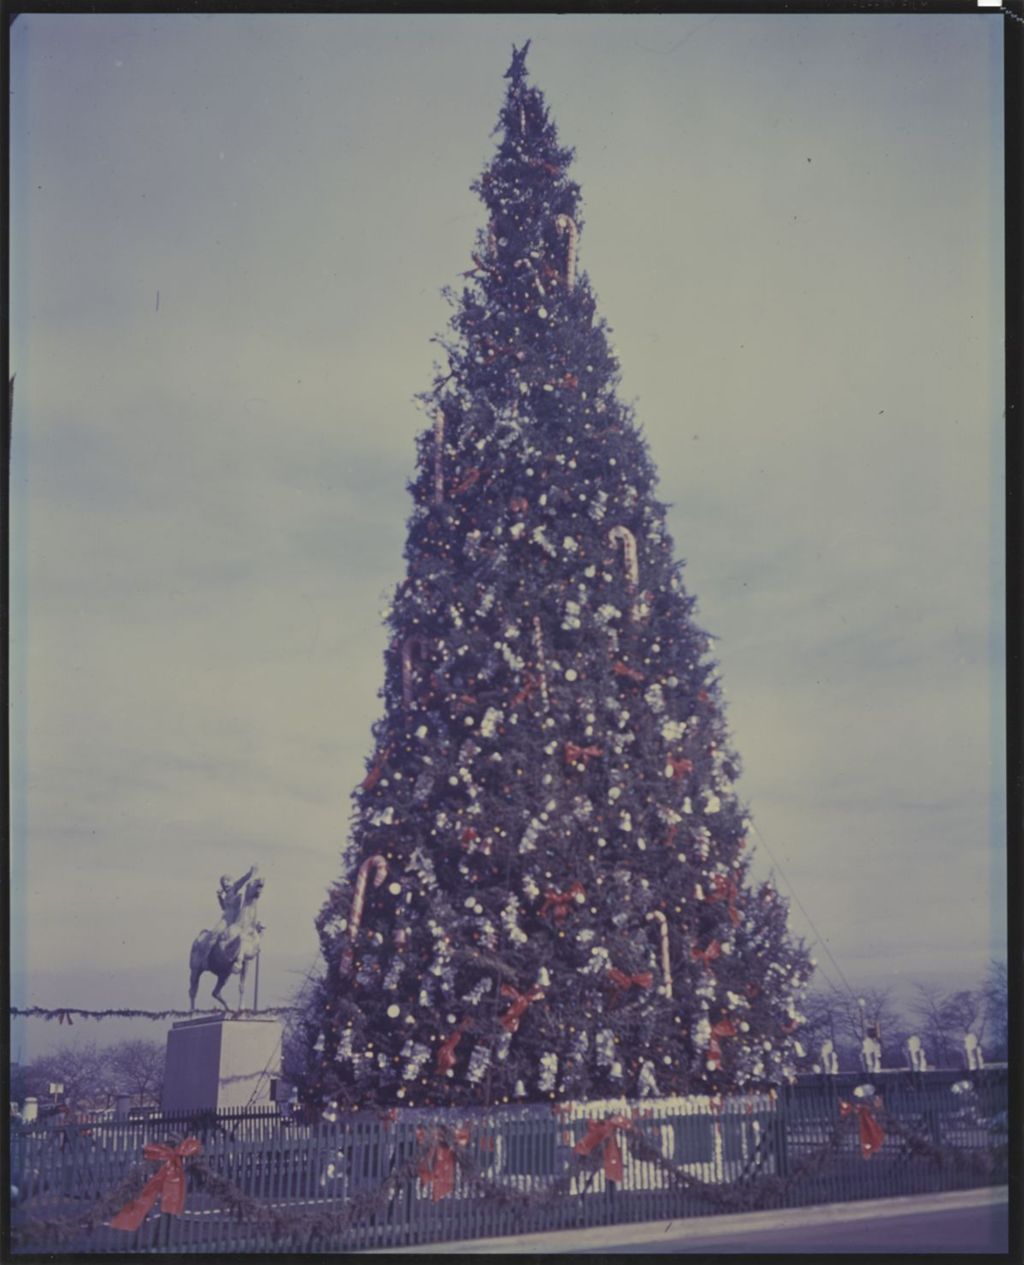 Miniature of Christmas tree at Michigan Avenue and Congress